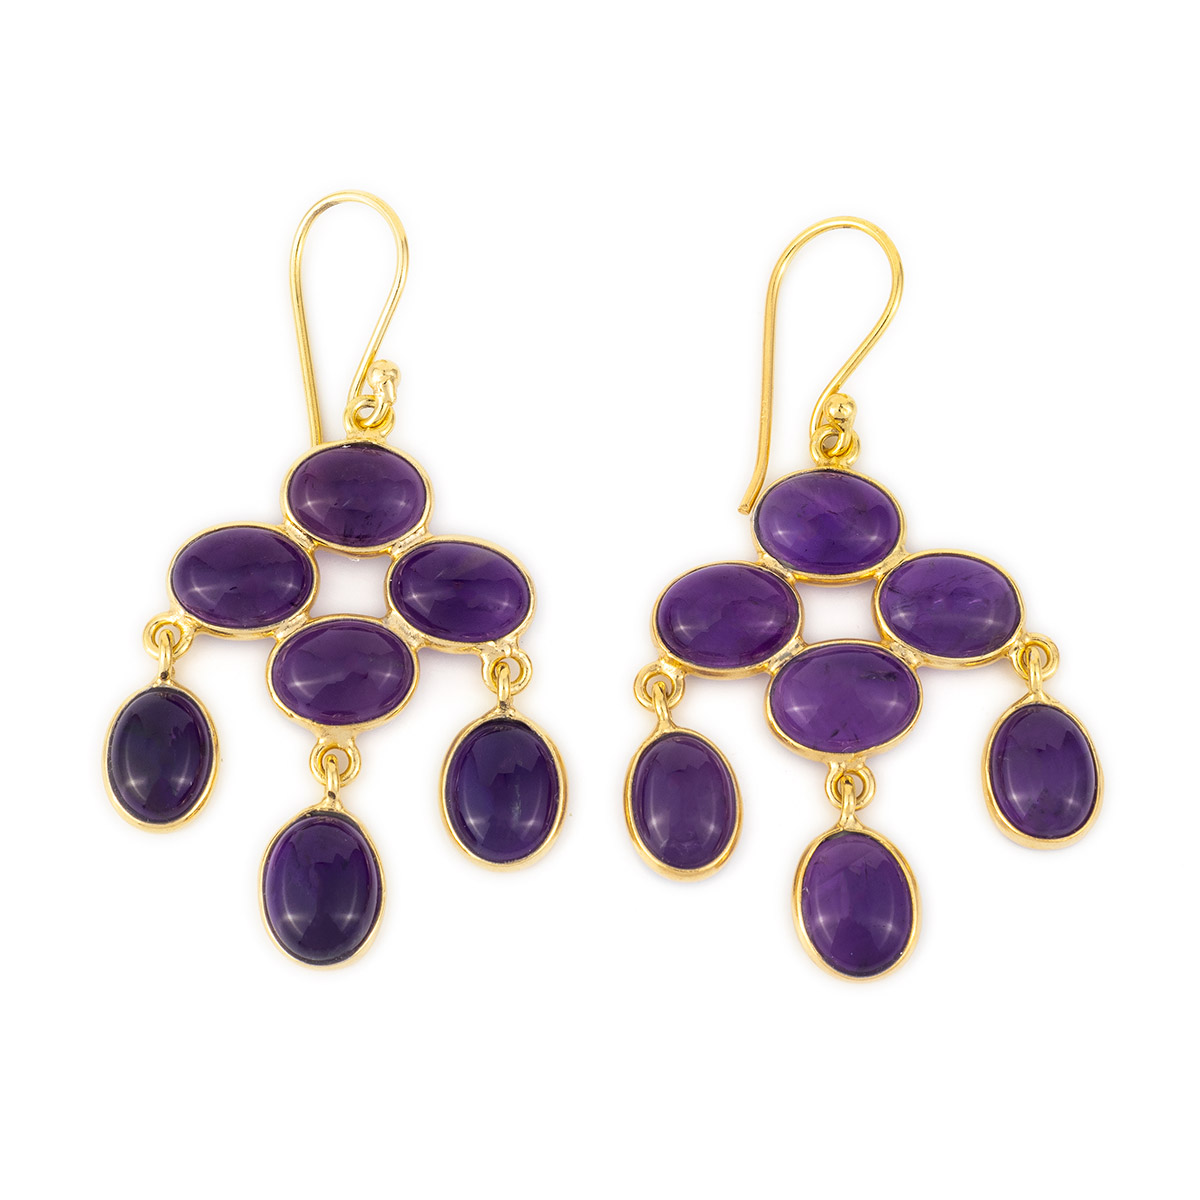 Amethyst Dangle Earrings - Sterling Silver and Gold Plated